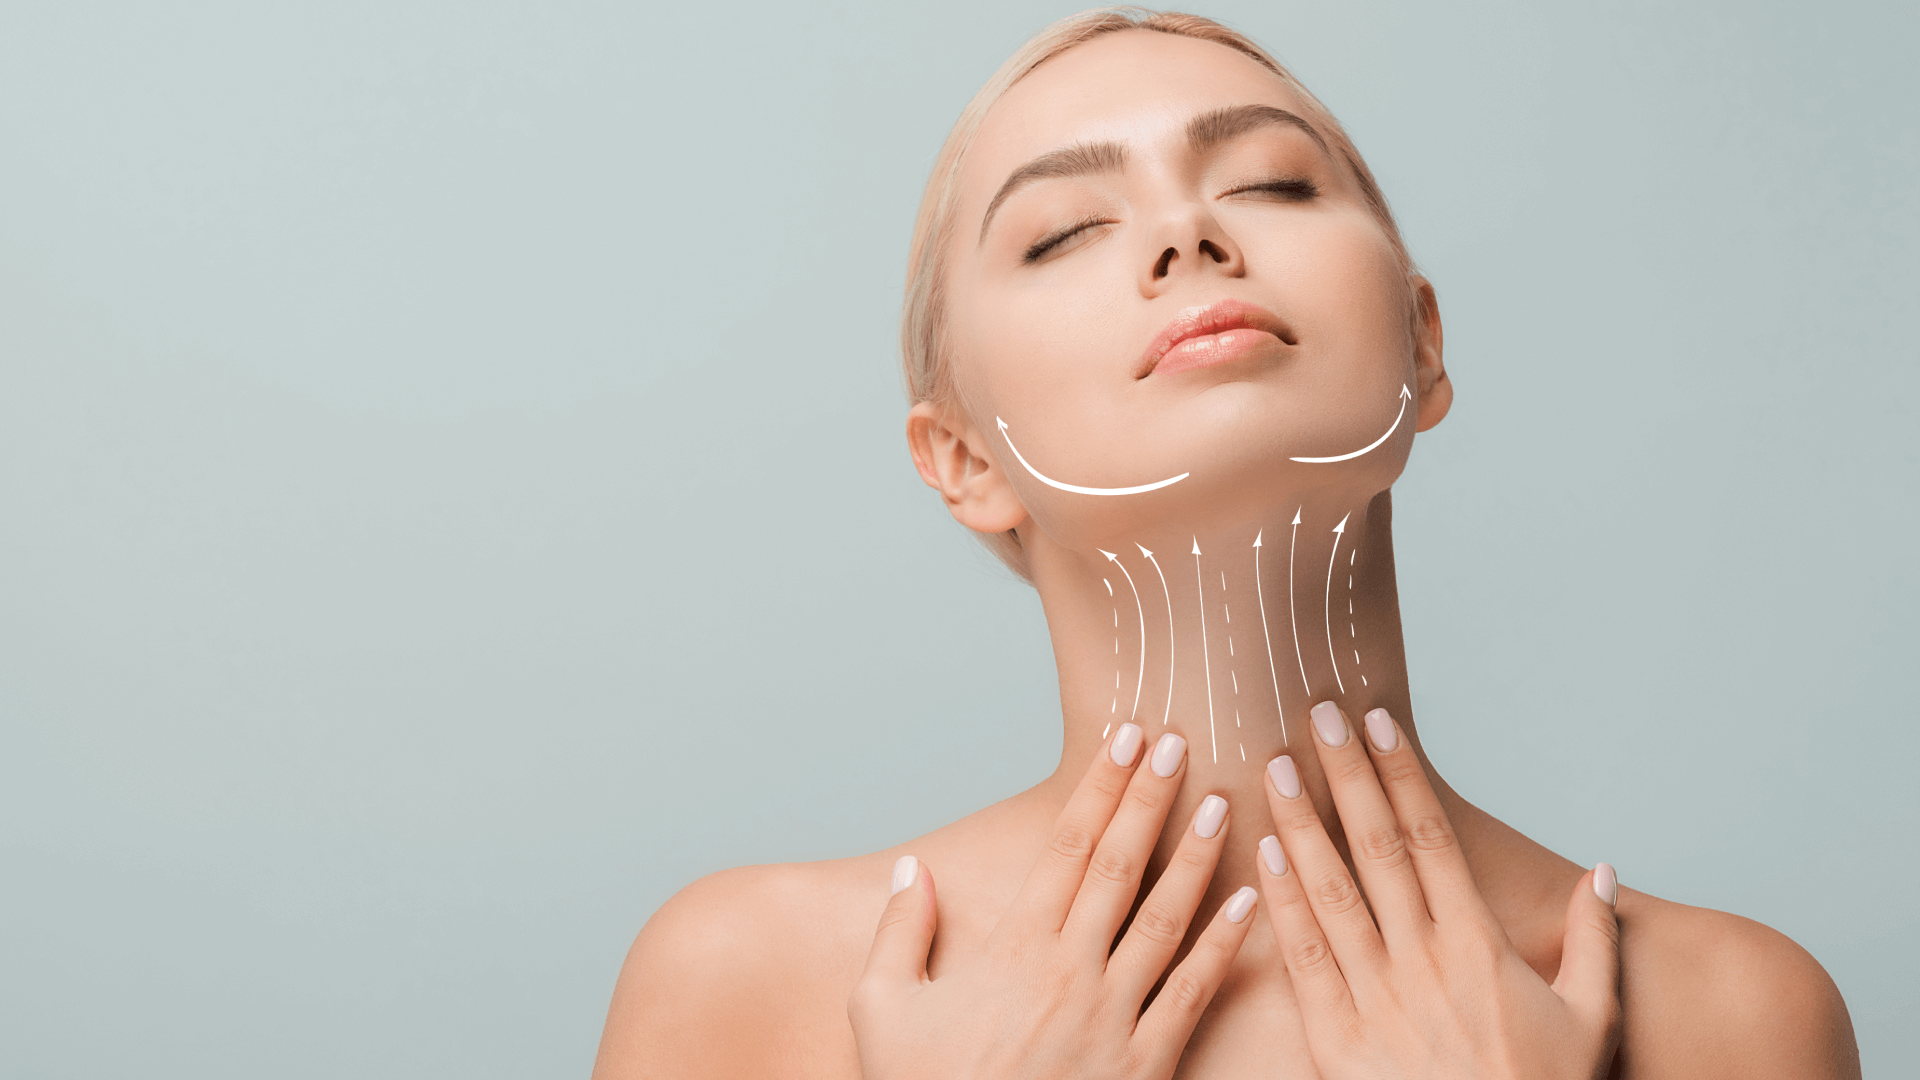 Plasma Pen Neck Lift At Home: Does It Work?